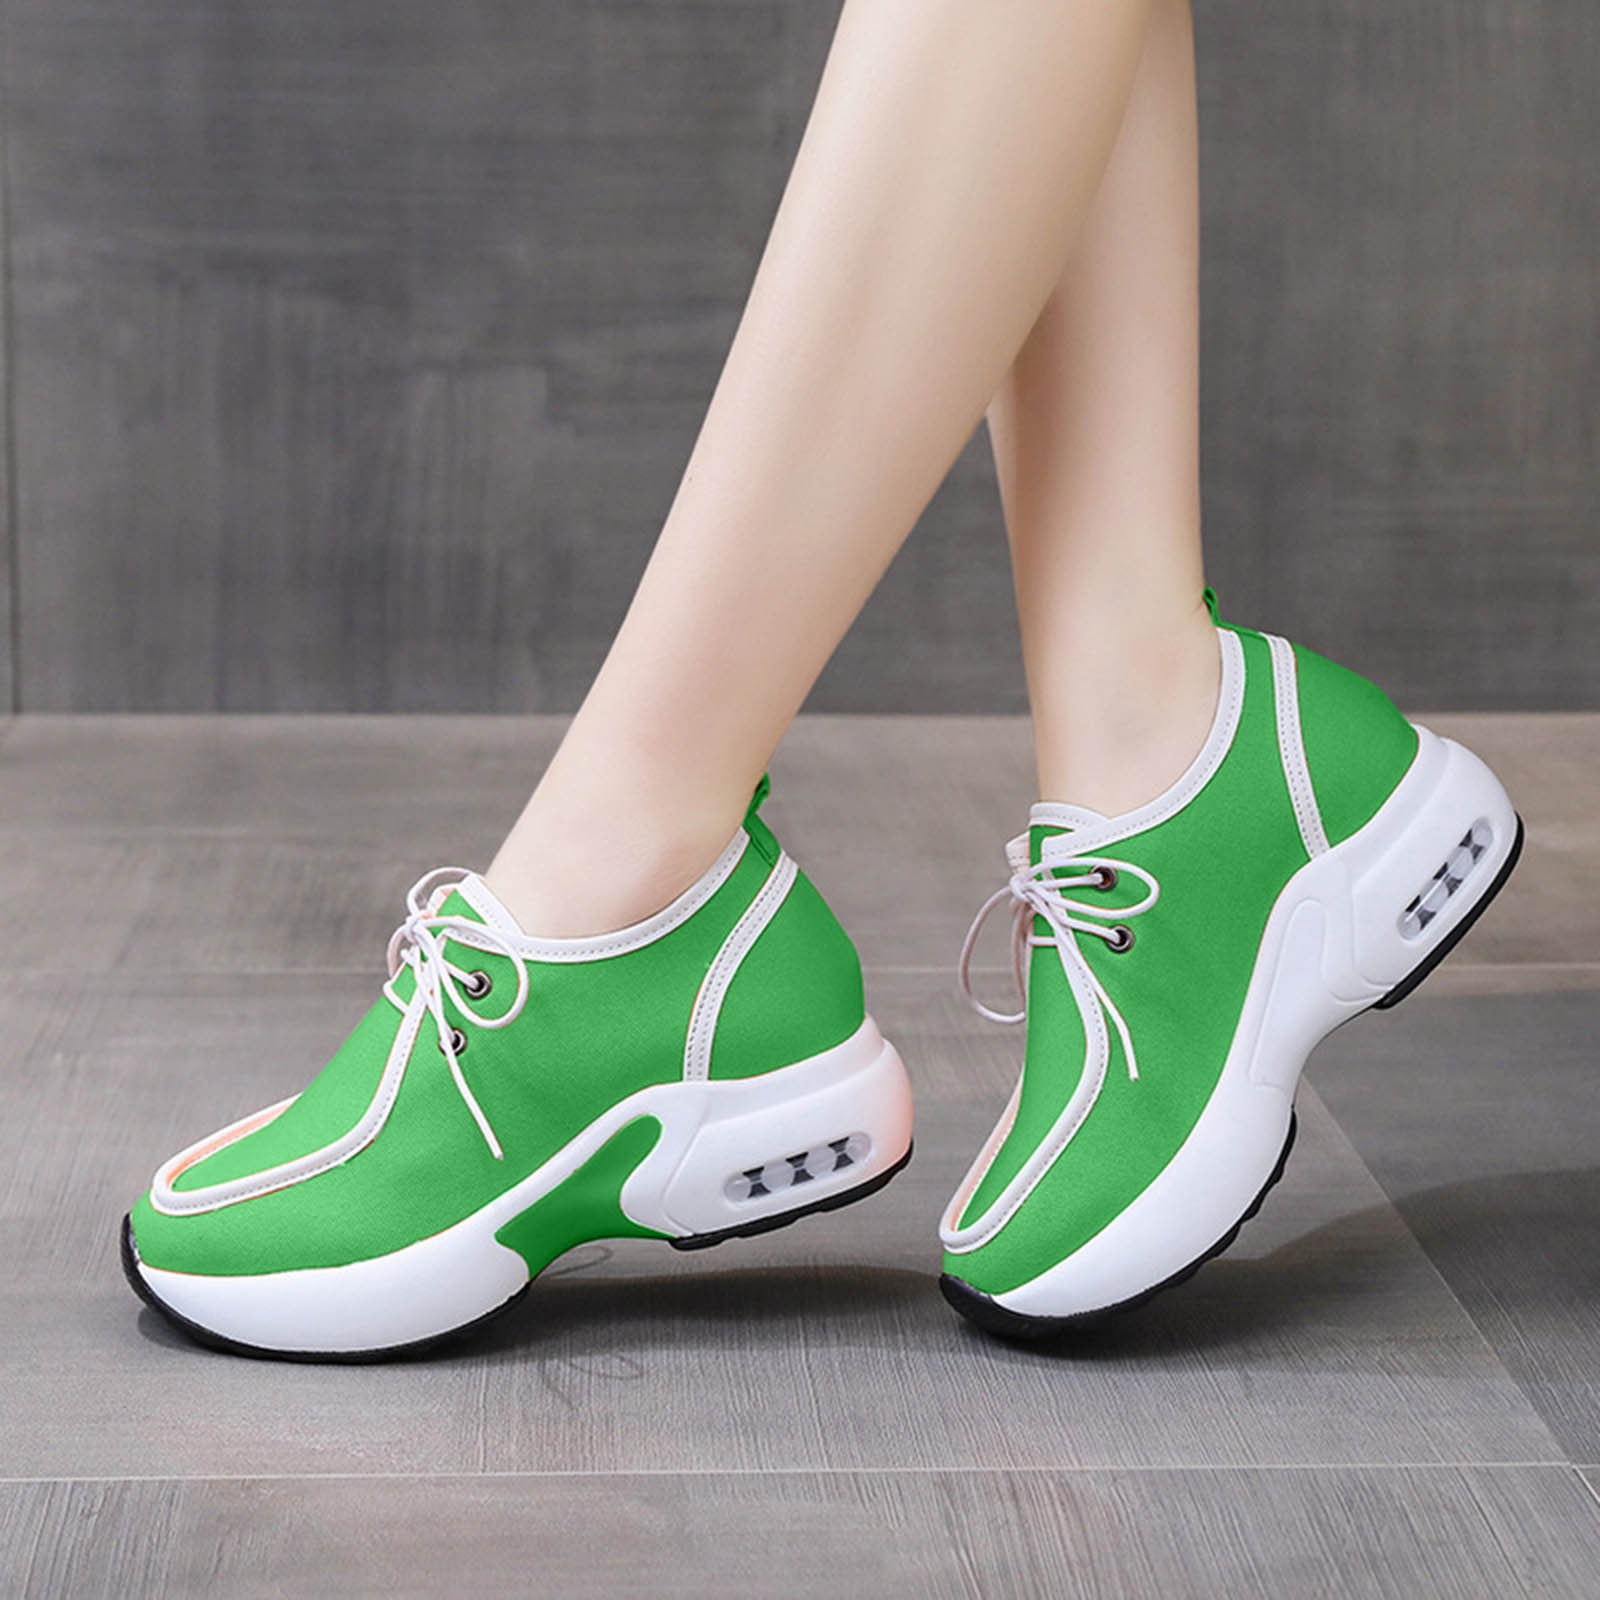 Shoes for Women's Sneakers,Fashionable Outdoor Thick Sole Colorblock Lace-Up Deep Mouth Breathable Sneakers - Walmart.com